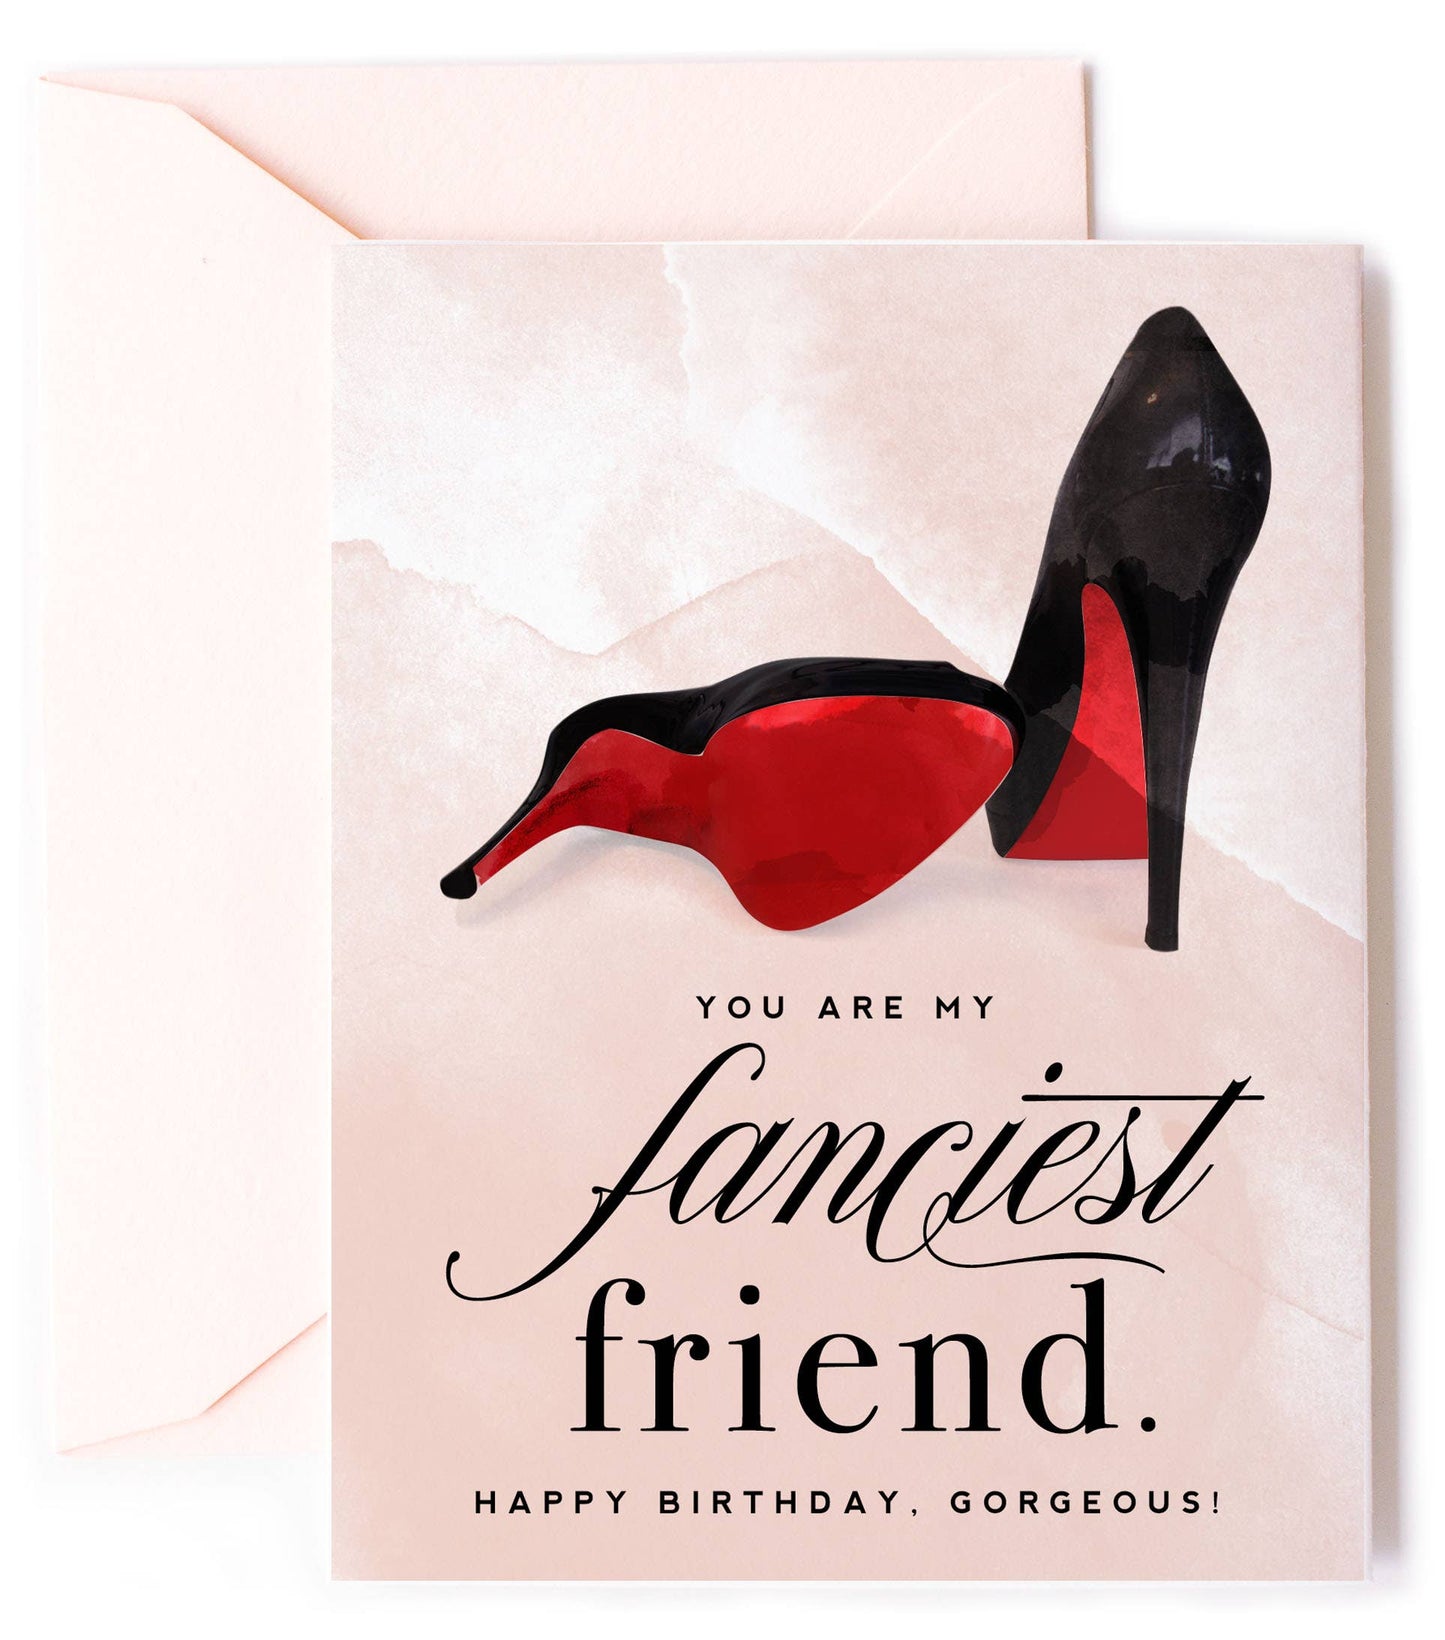 Kitty Meow Boutique - Fanciest Friend Birthday Card with Red Bottom High Heels